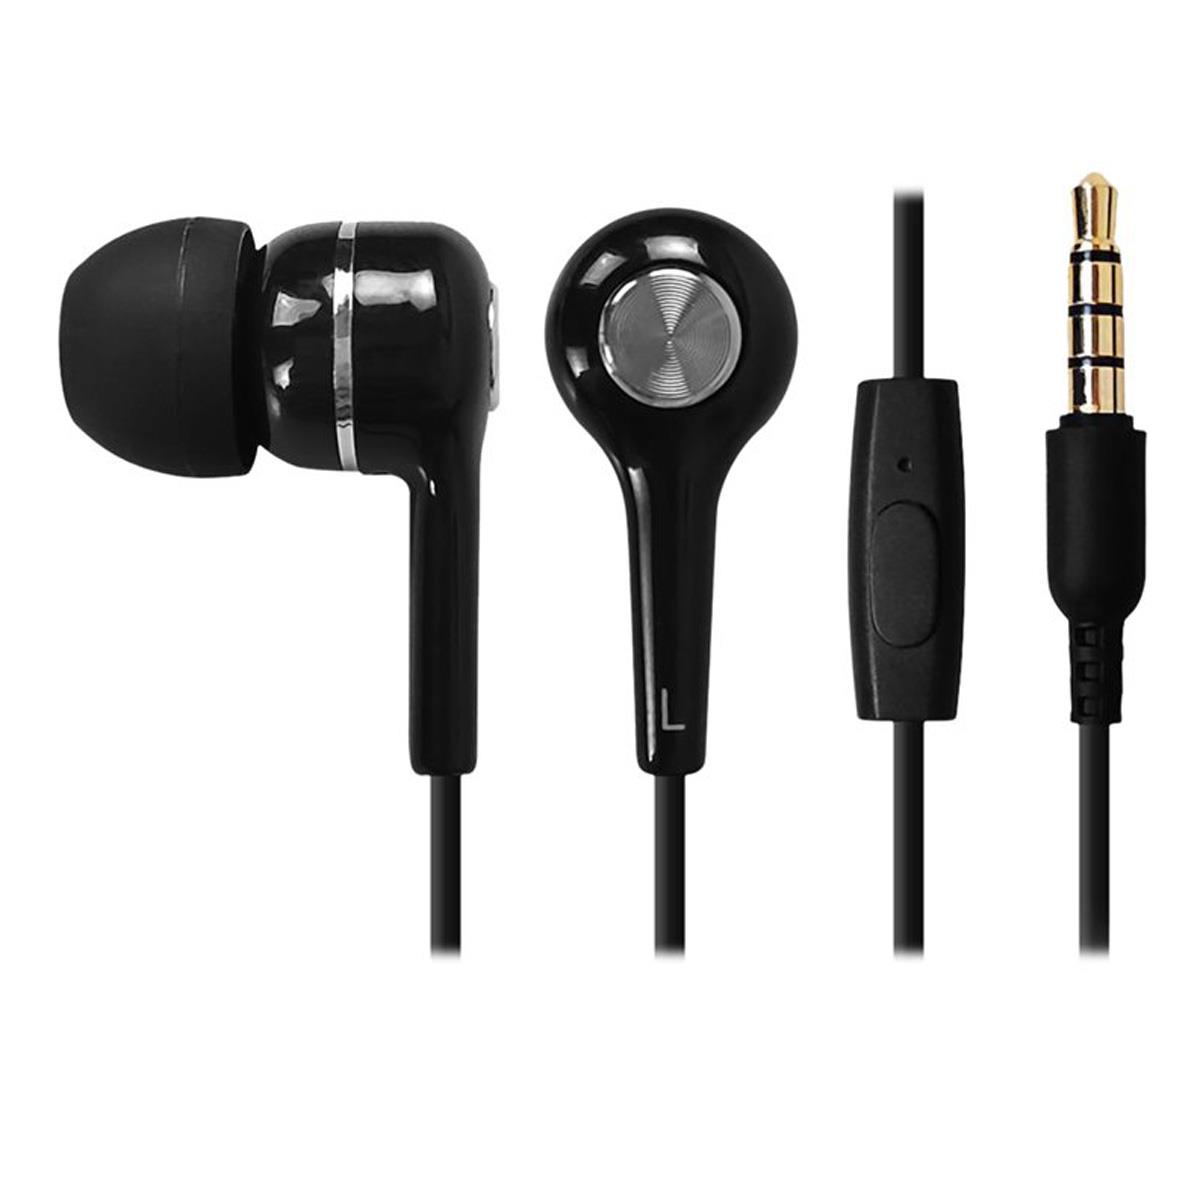 Image of iMicro SP-IMT22 Wired In-Ear Earphones